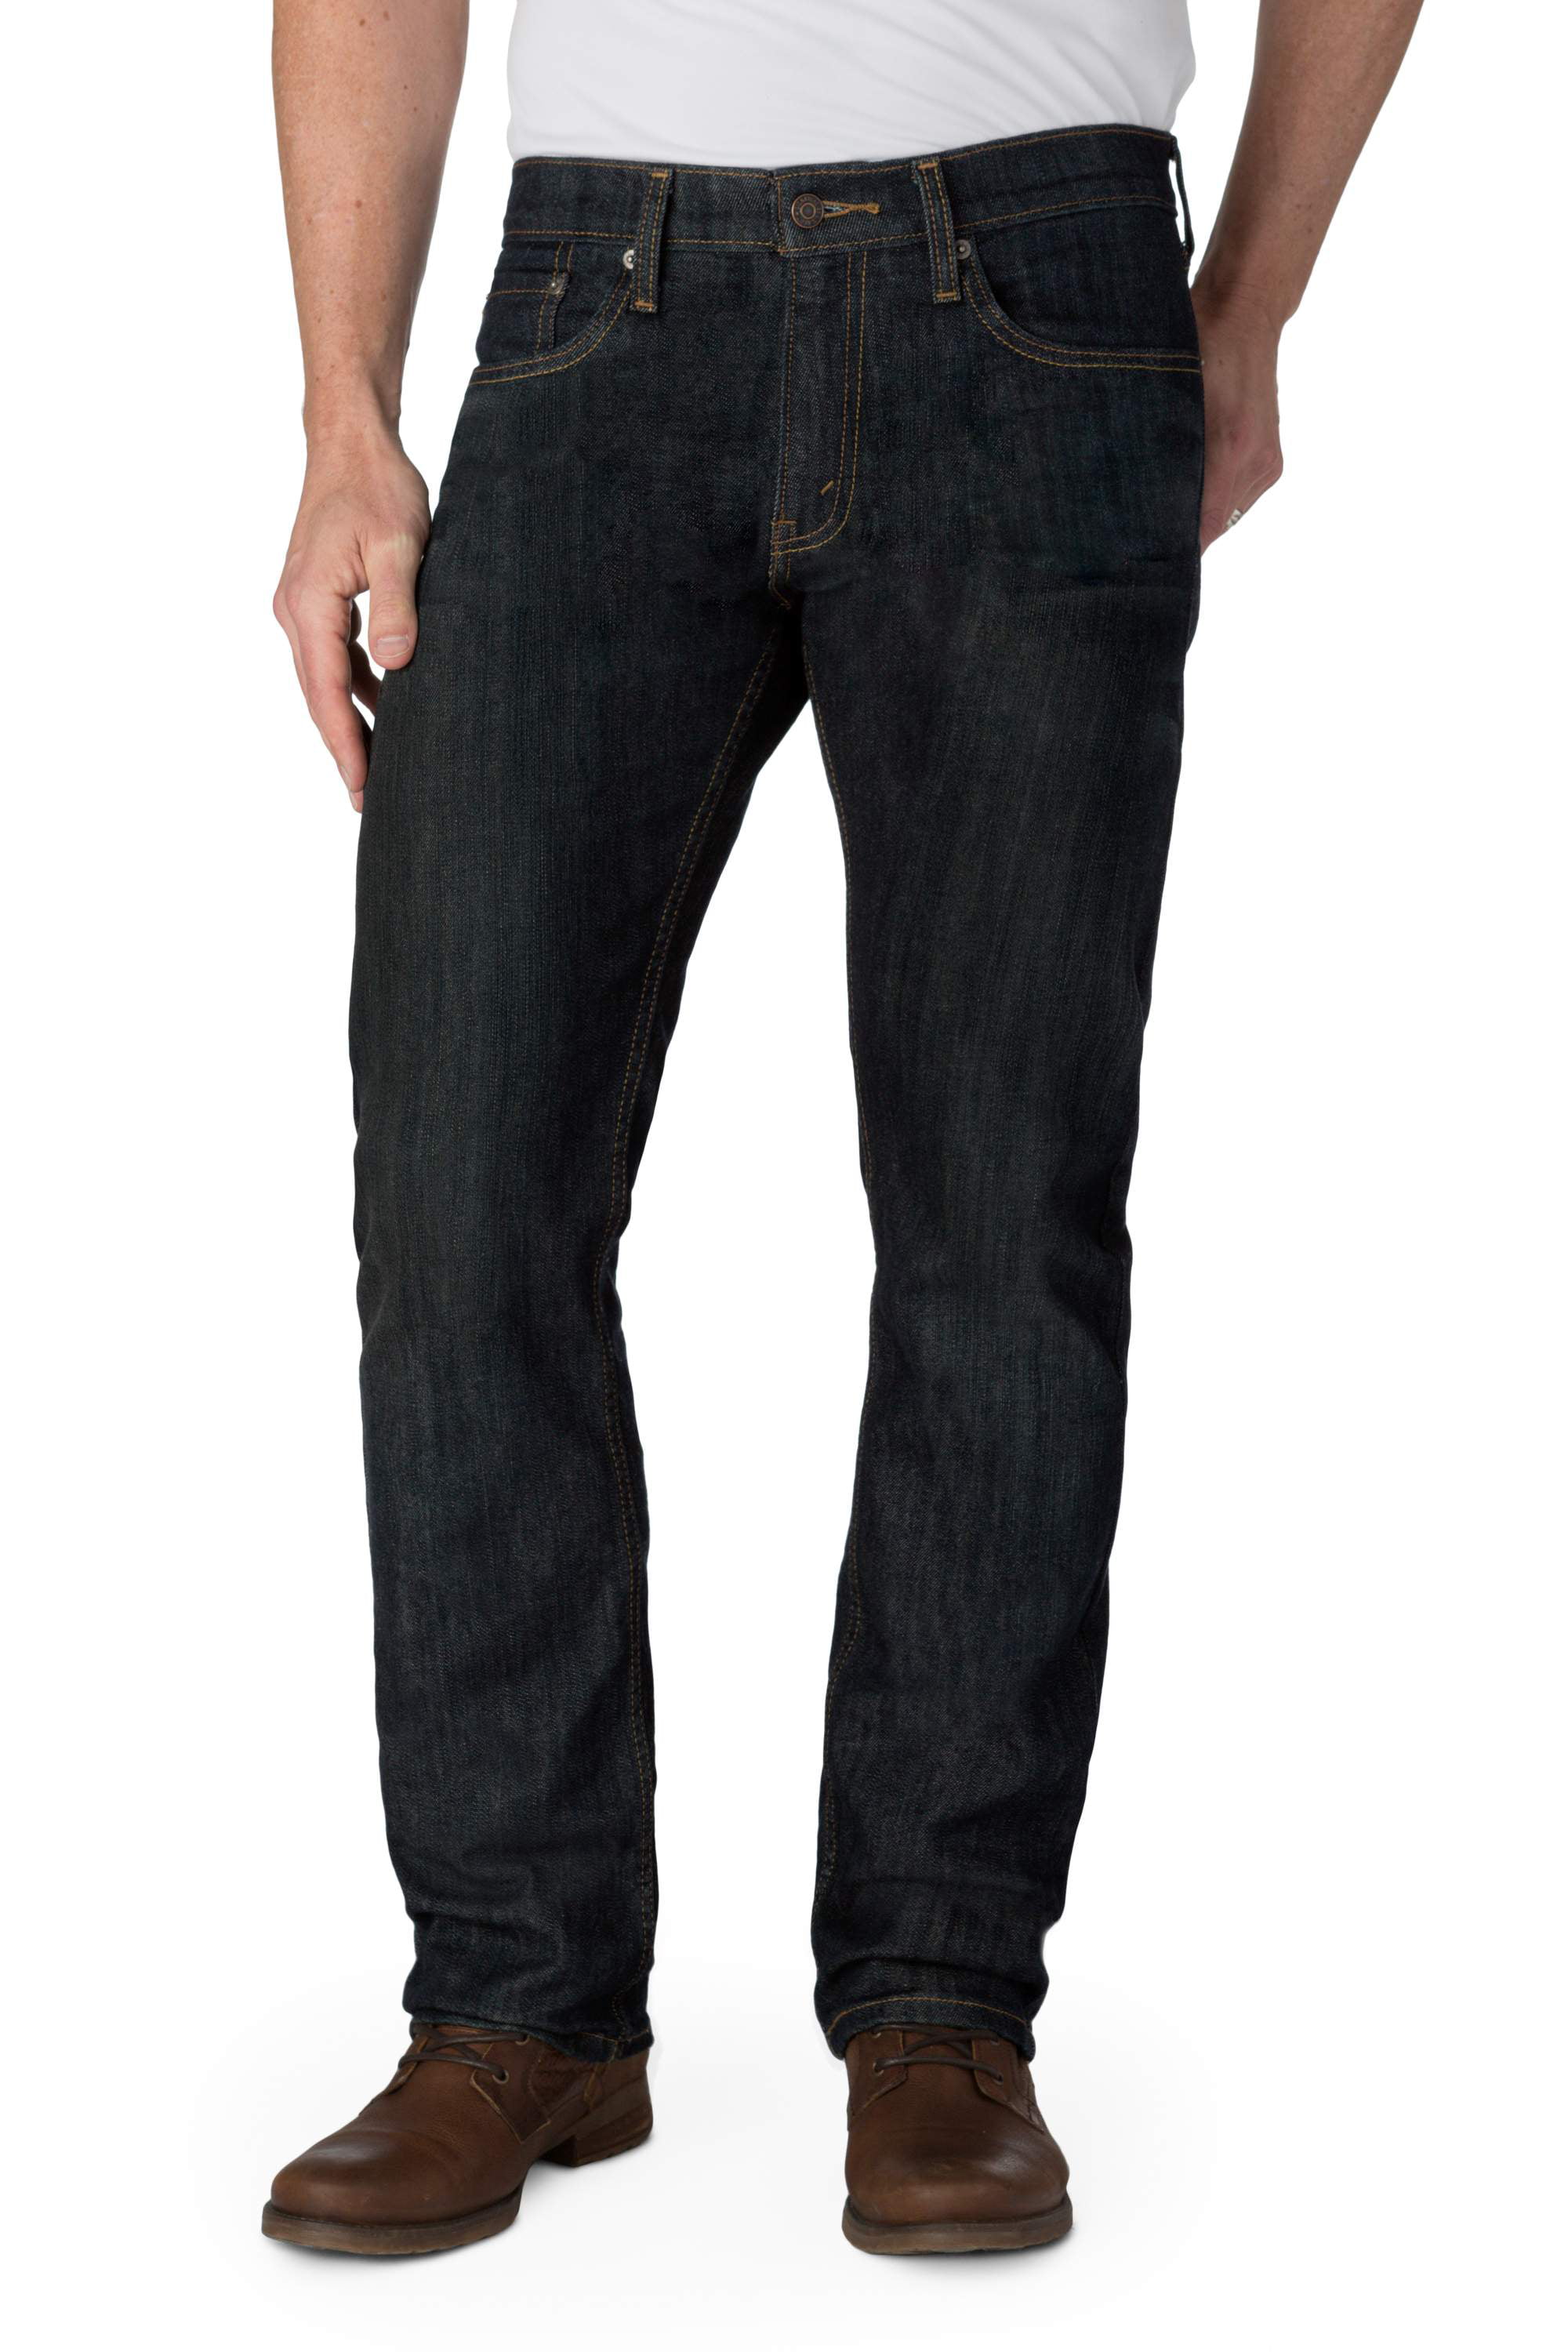 Signature by Levi Strauss & Co. Men's Regular Fit Jeans 